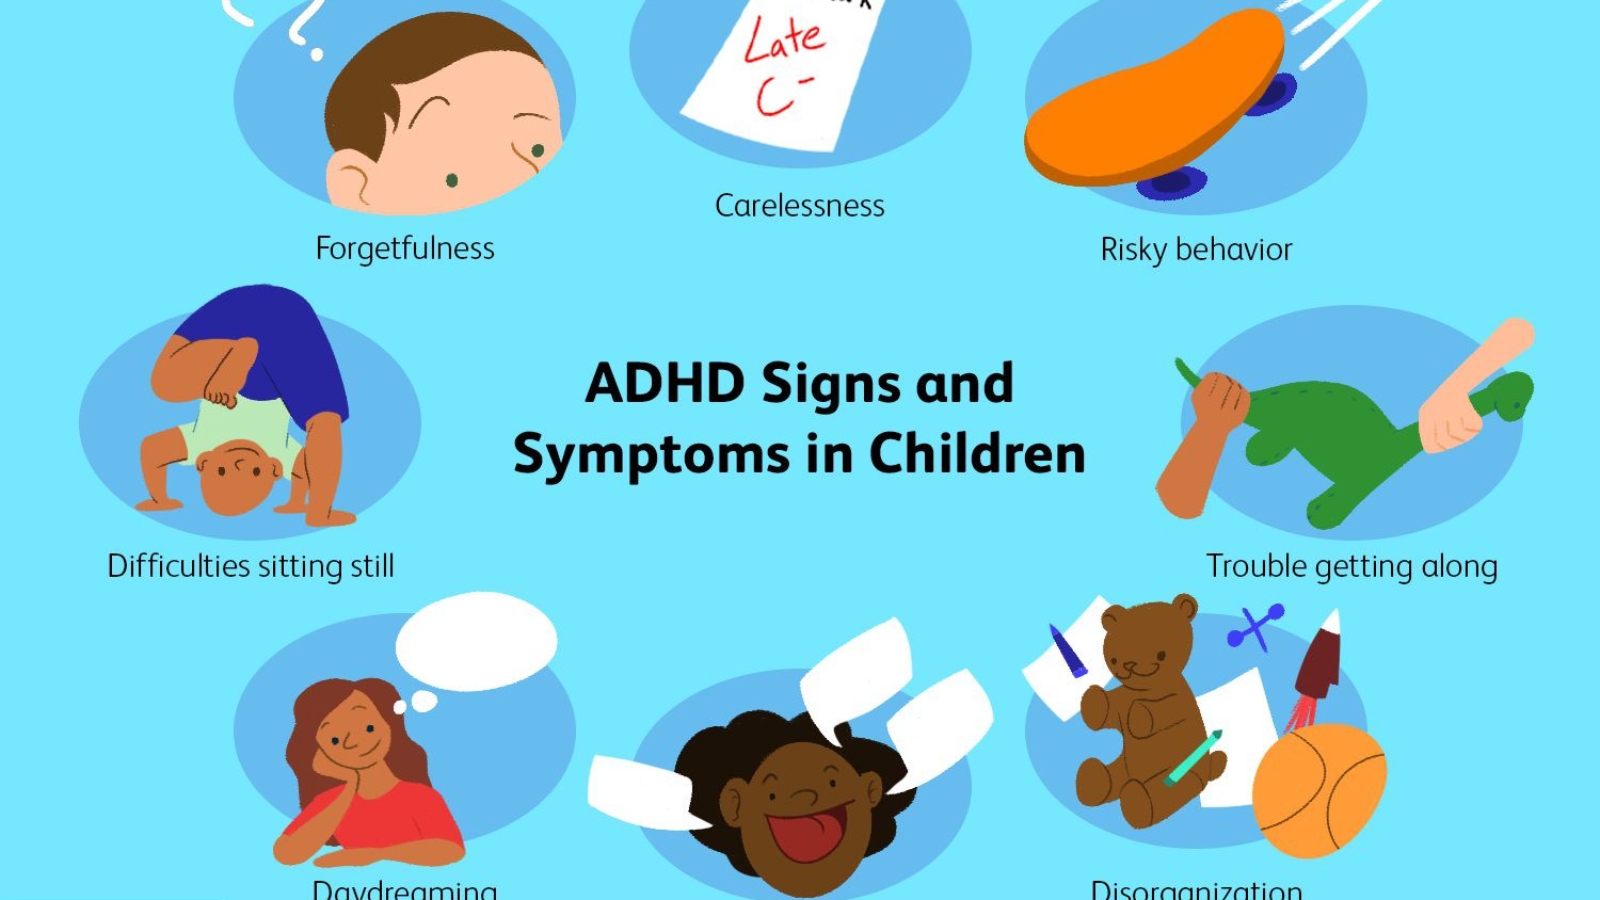 adhd-attention-deficit-hyperactivity-disorder-included-definition-symptoms-traits-causes-treatment-5084784_final-bc92546bc9df465ea7f13fc423c2085b